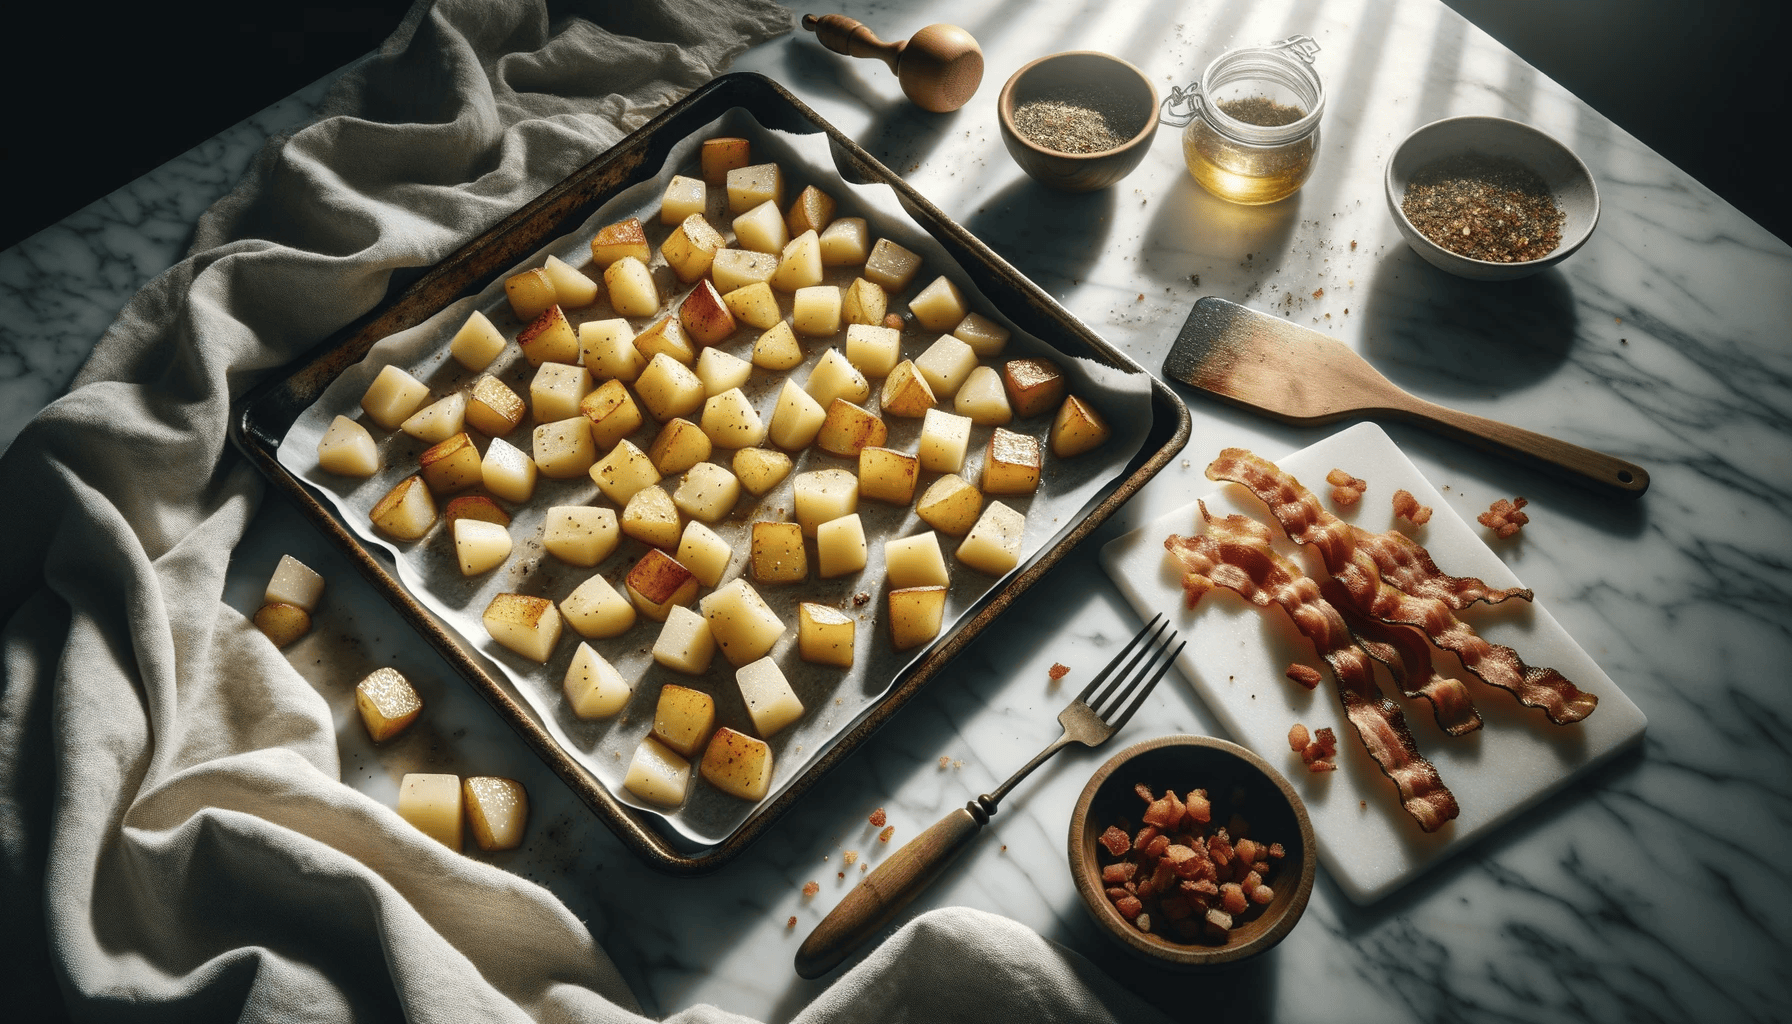 The making of bacon roasted potatoes recipe